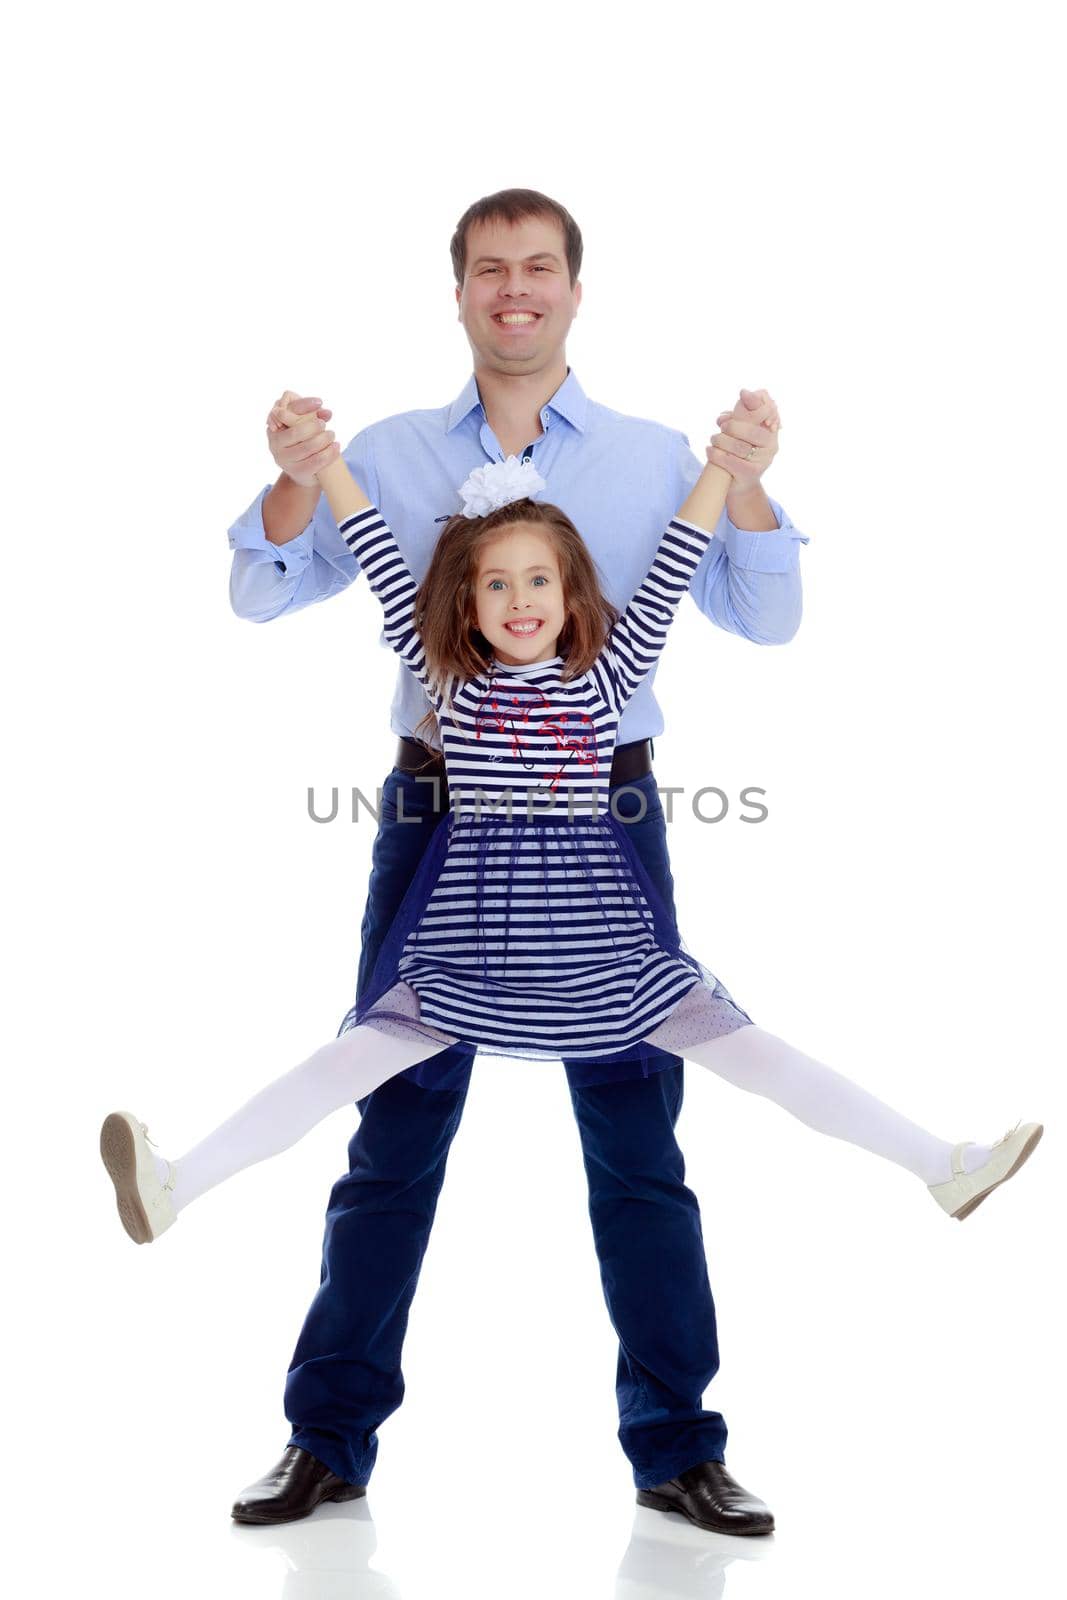 Happy young dad raise his beloved daughter's hands.Isolated on white background.